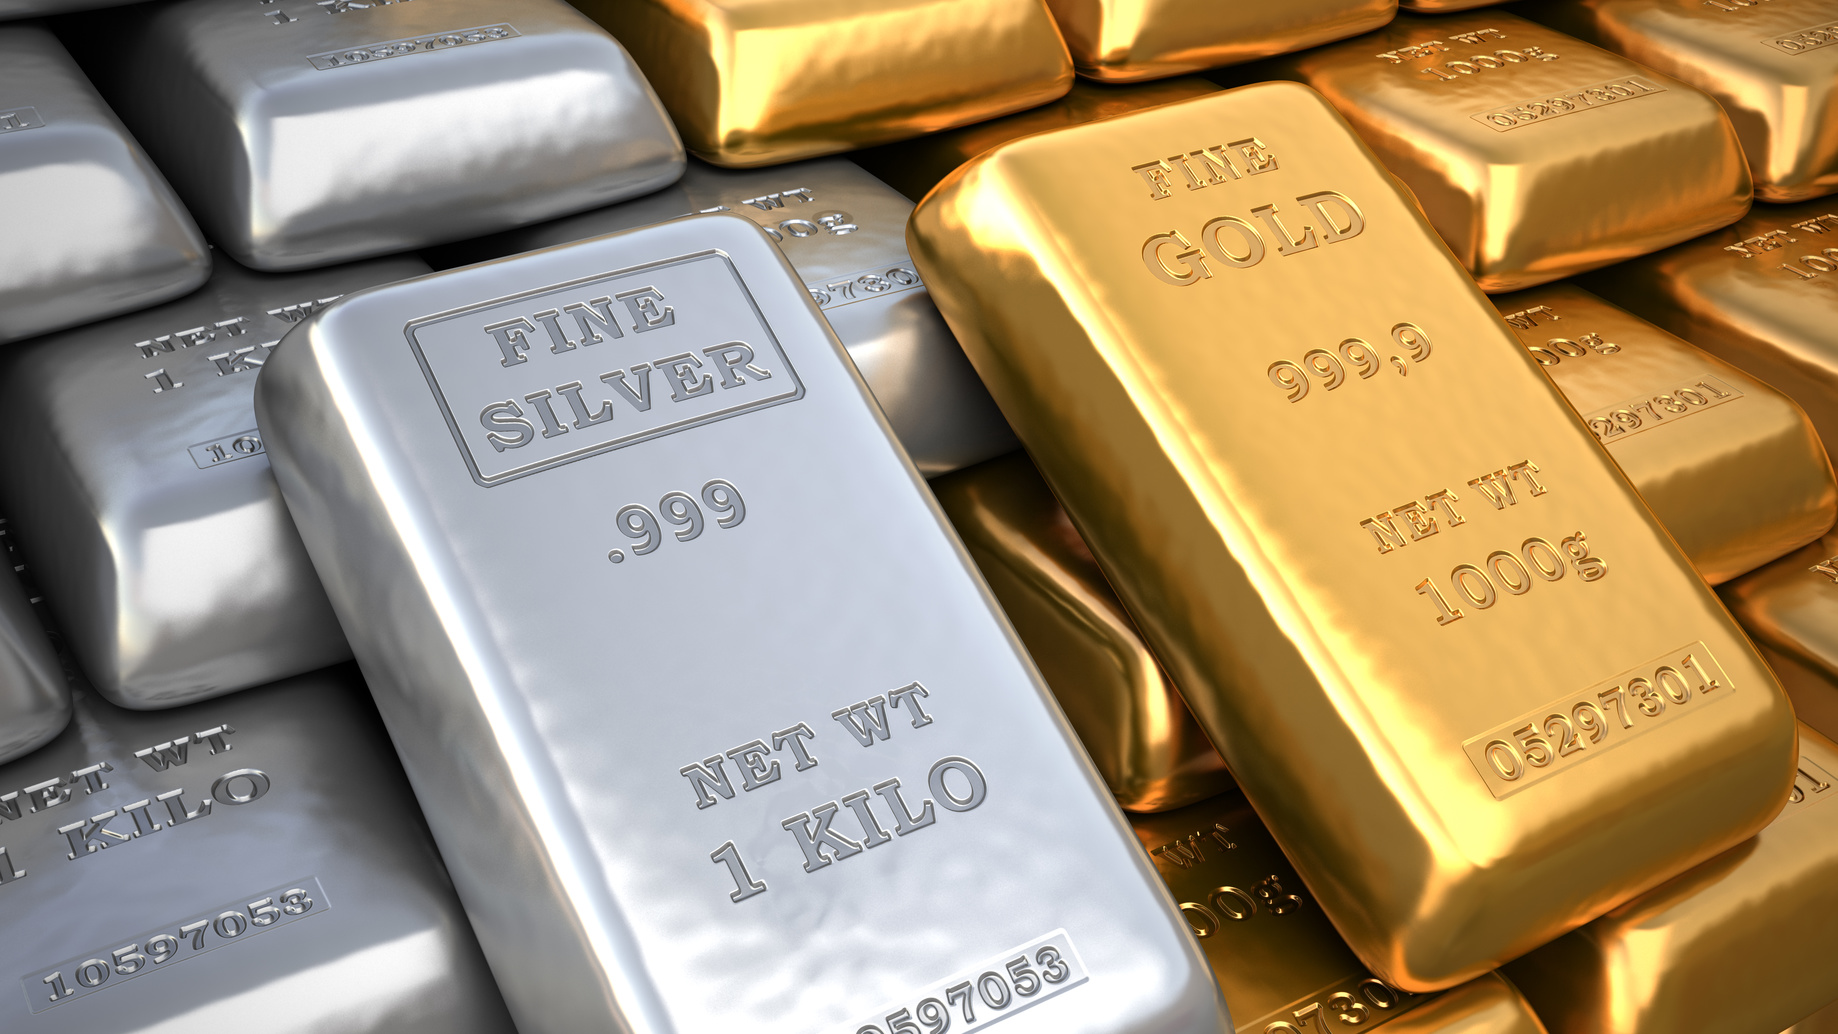 The only reliable gold and silver futures	are shares in mining companies